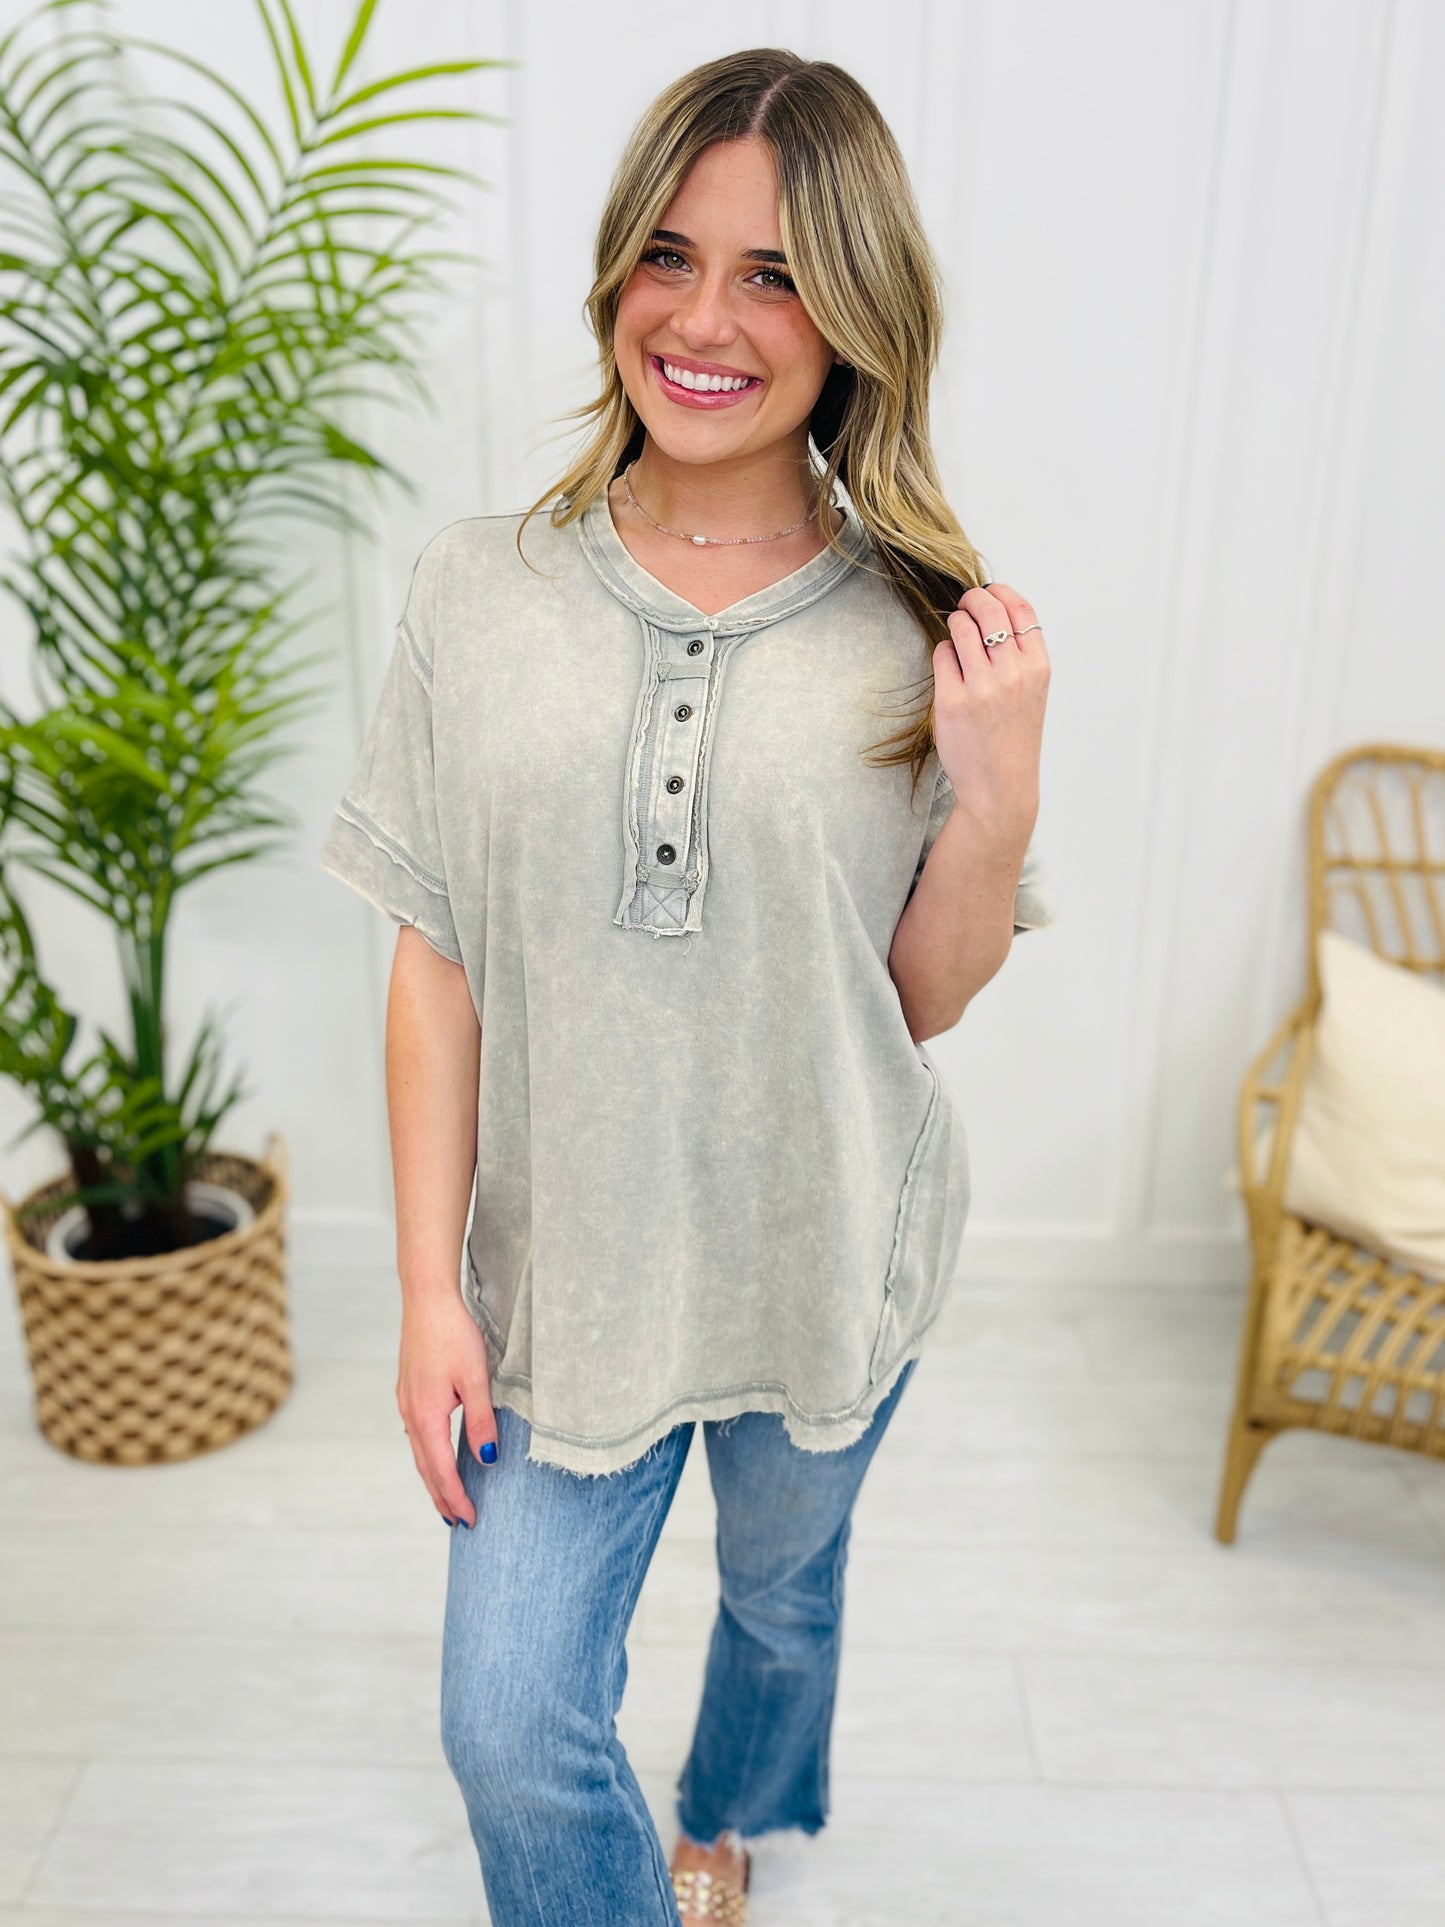 DOORBUSTER! Our Love Connection Top- Multiple Colors!